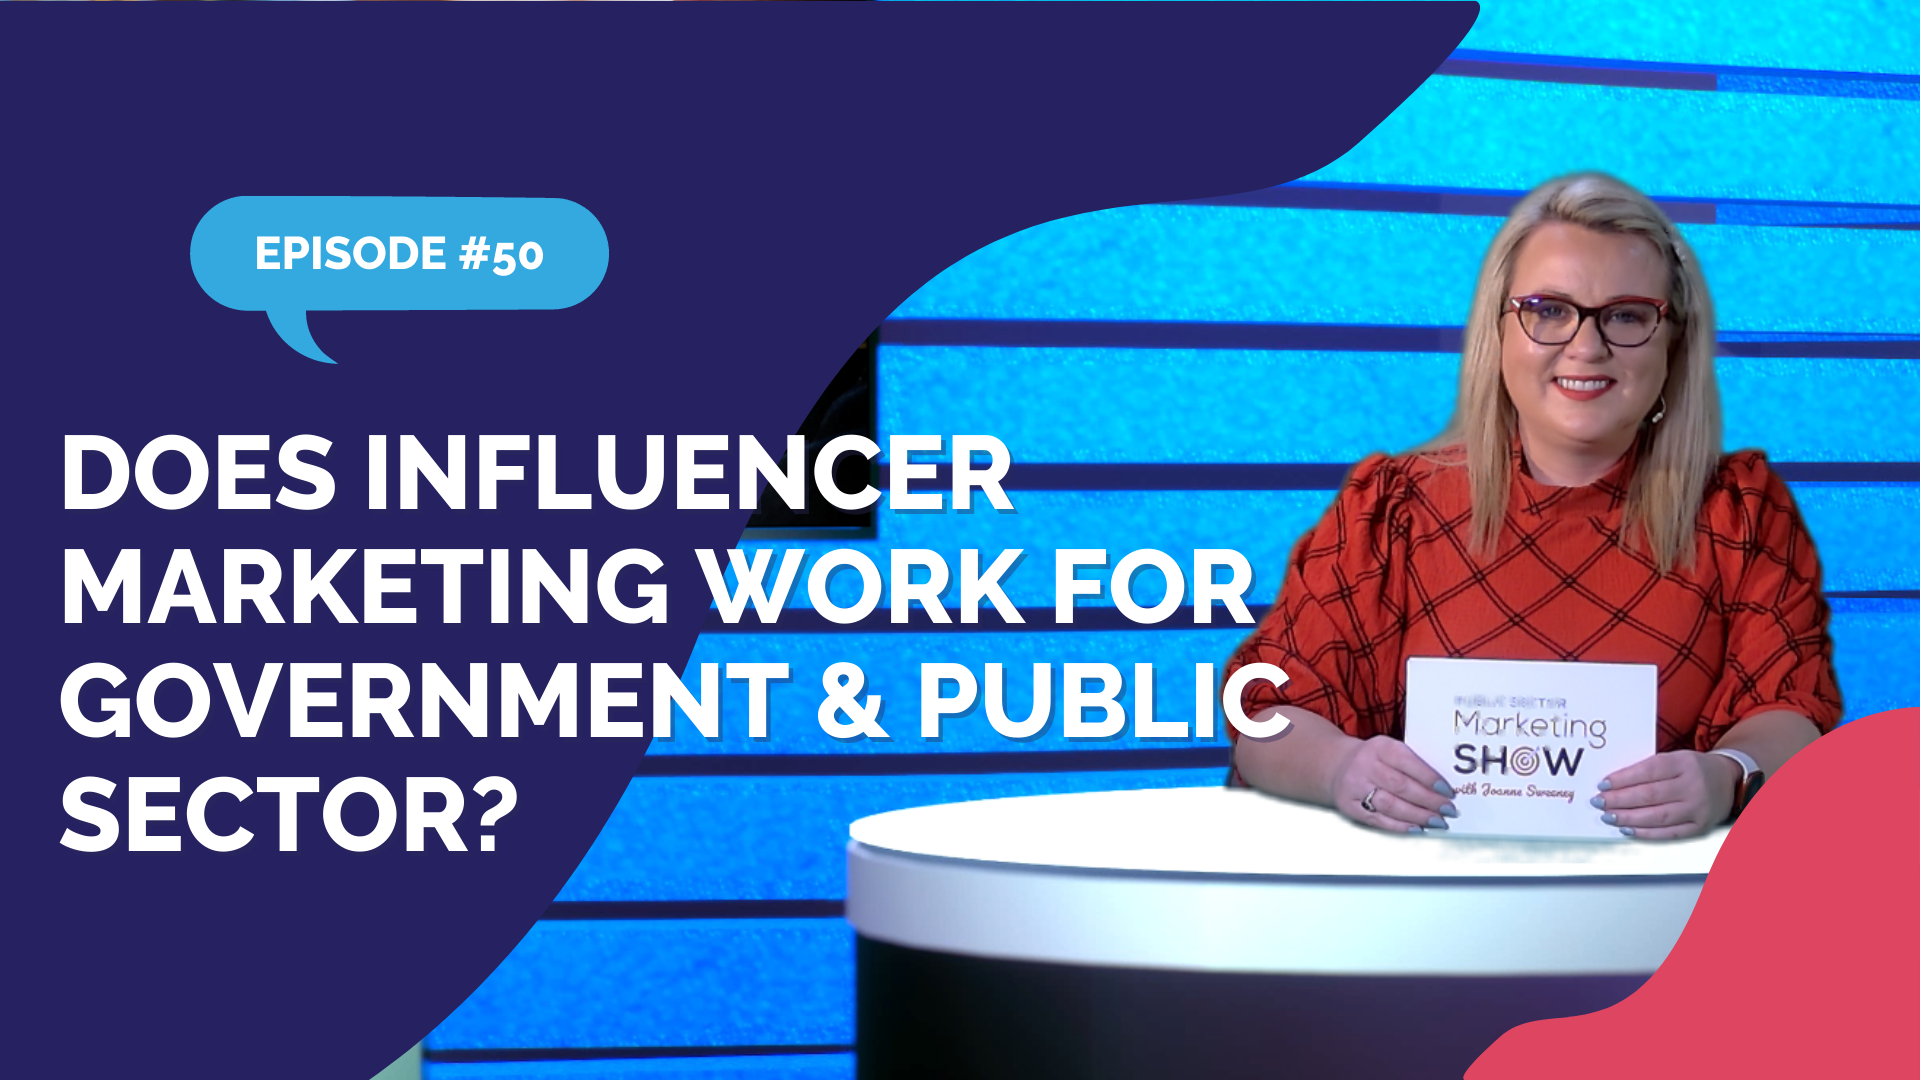 Episode 50 - Does Influencer Marketing Work for Government & Public Sector?